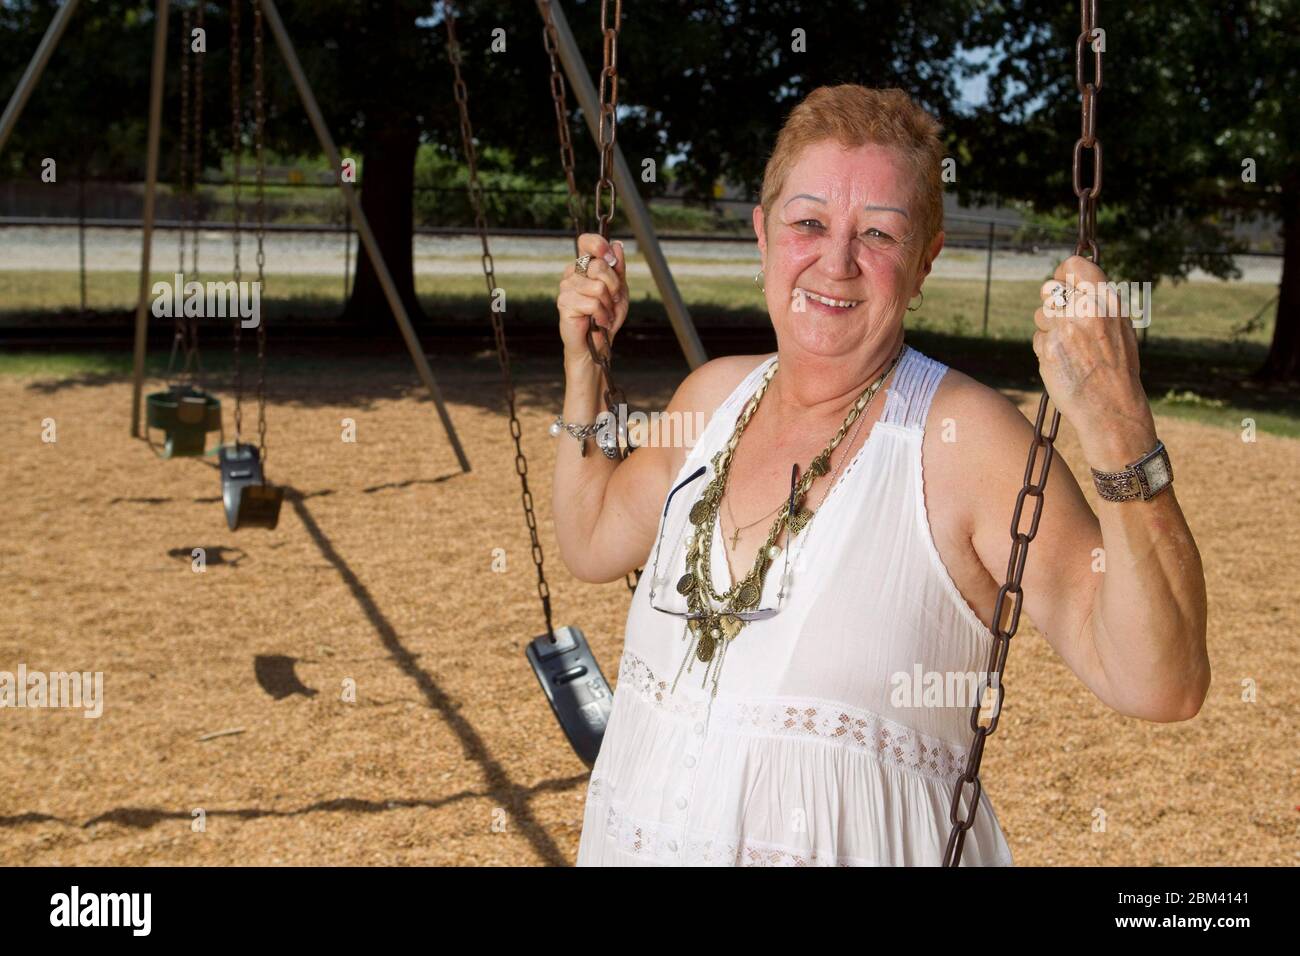 Smithville Texas USA, July 2011: Pro-life activist Norma McCorvey poses in a small city park on a sweltering summer afternoon.  McCorvey, who was 'Jane Roe' in the 1973 Supreme Court case of Roe vs. Wade that struck down many state laws that restricted abortion, has led an eventful and fascinating life on both sides of the issue. ©Bob Daemmrich Stock Photo